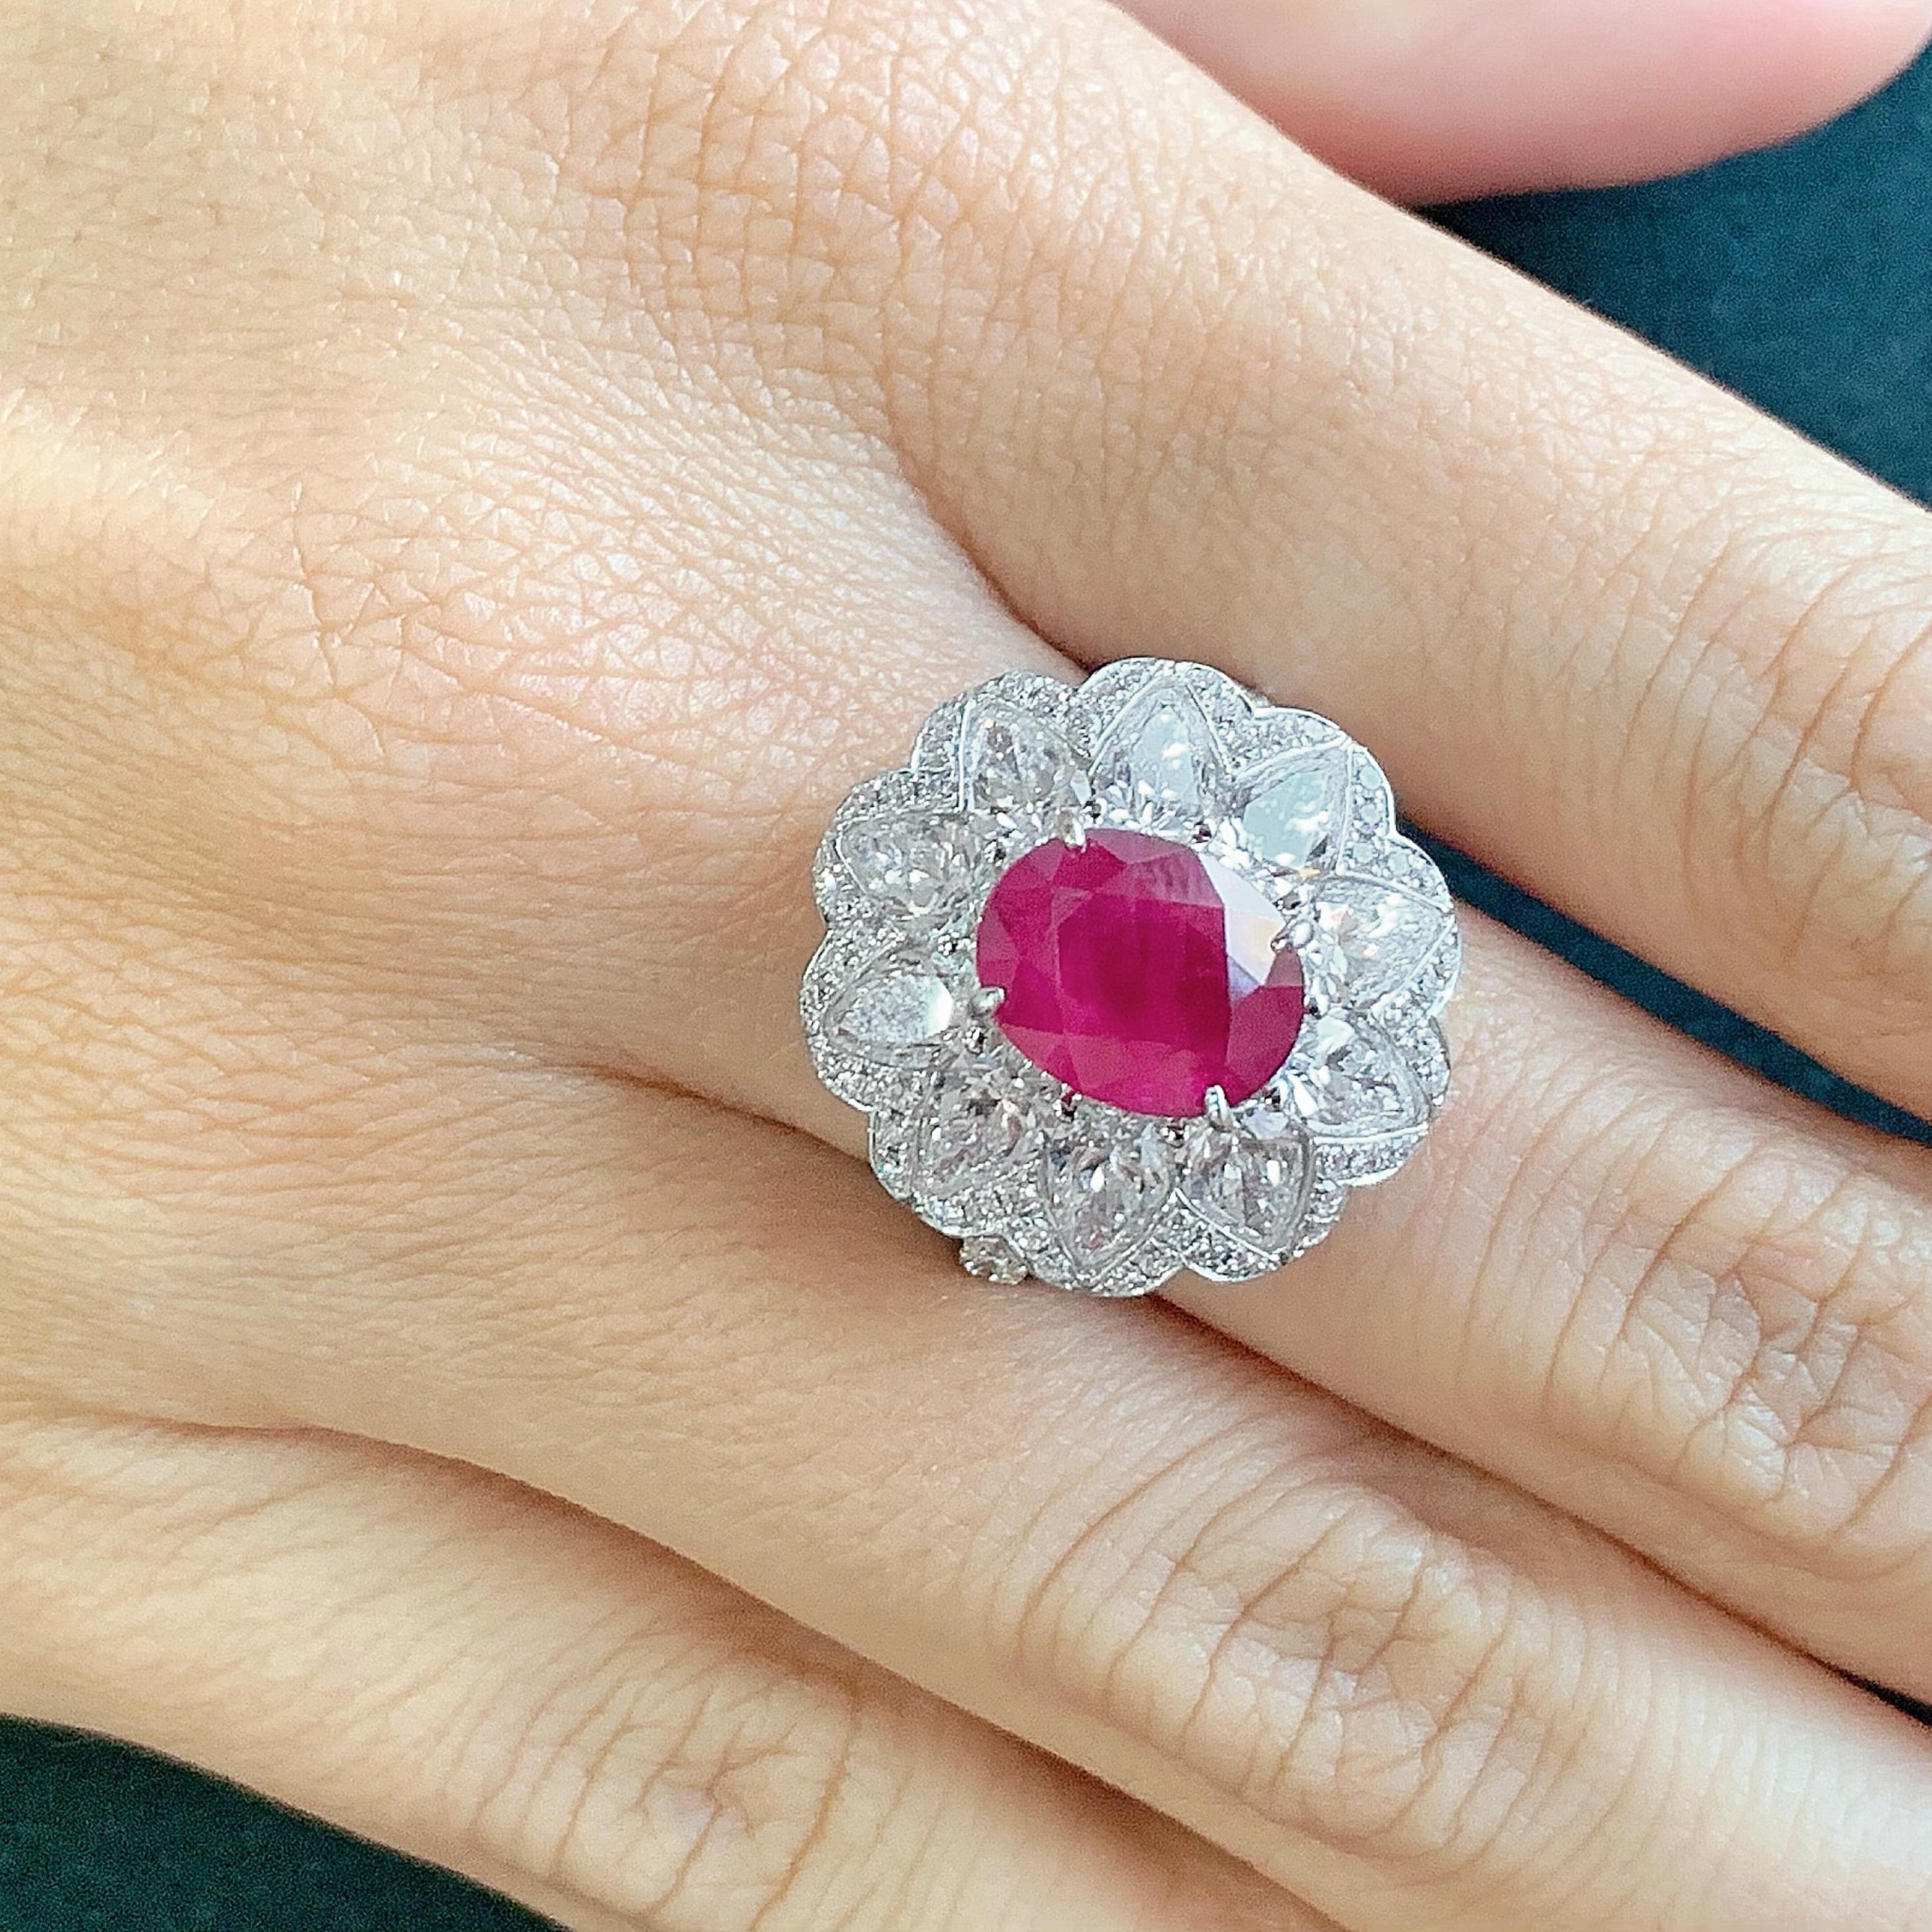 Centered with a magnificent 3.80 carat GRS certified oval-cut Burma ruby, Butani's 18-karat white gold cocktail ring is encrusted with 3.81 carats of glistening white diamonds in a floral silhouette.  It would make a thoughtful gift for someone with